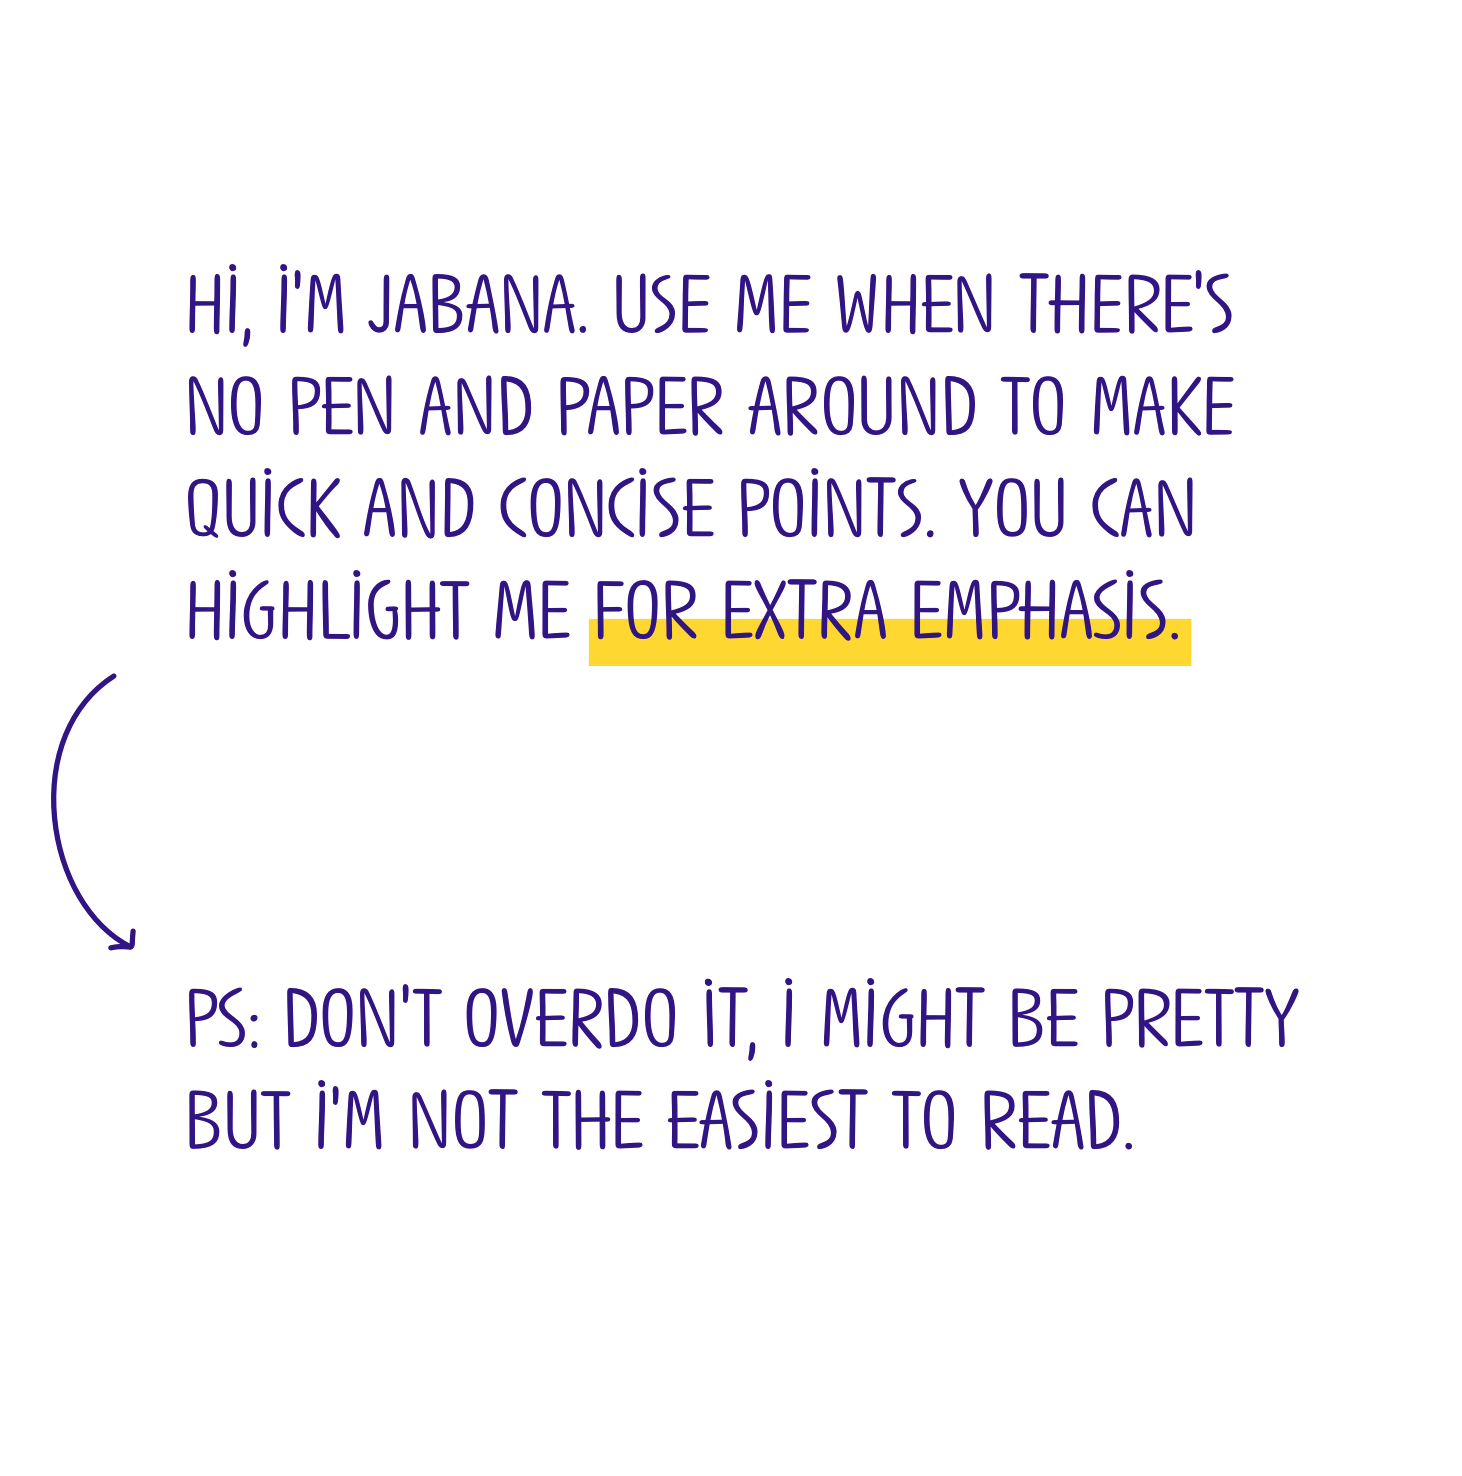 A white background with purple text “Hi. I'm Jabana. use me when there's no pen and paper around to make quick and concise points. You can highlight me for extra emphasis. PS: Don't overdo it, I might be pretty but I'm not the easiest to read.”